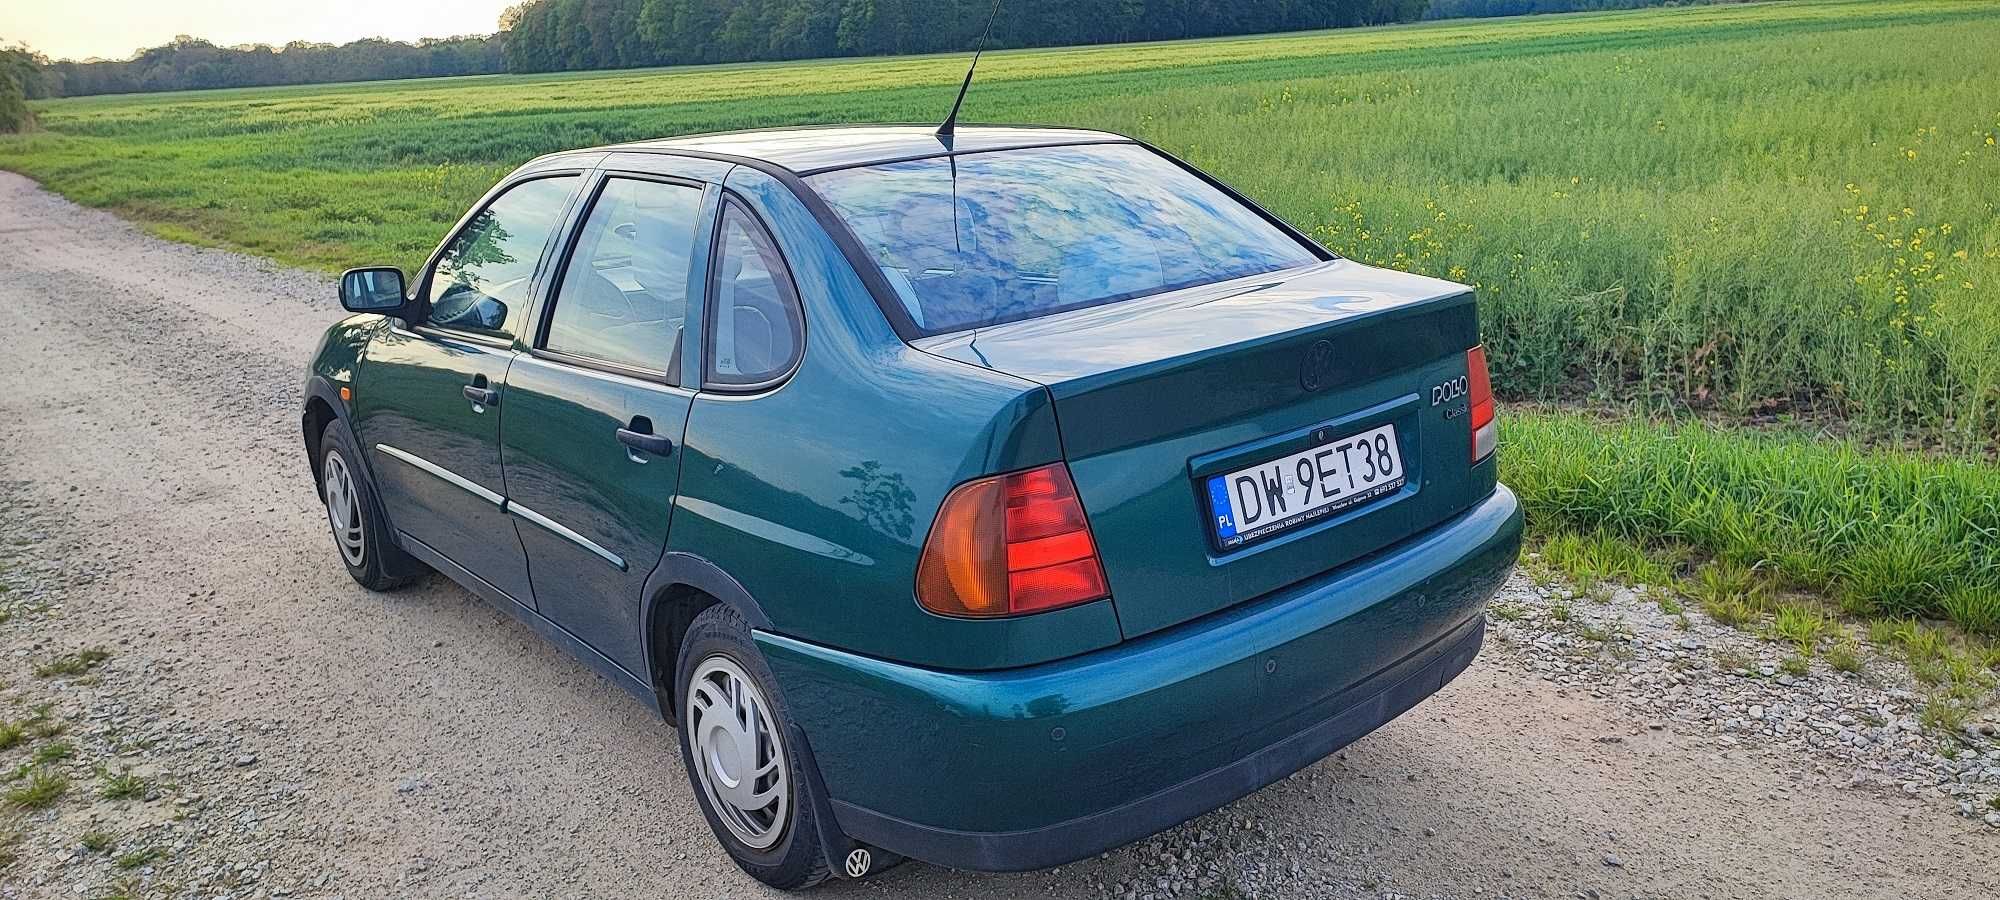 Volkswagen Polo Classic 1.4 Benzyna